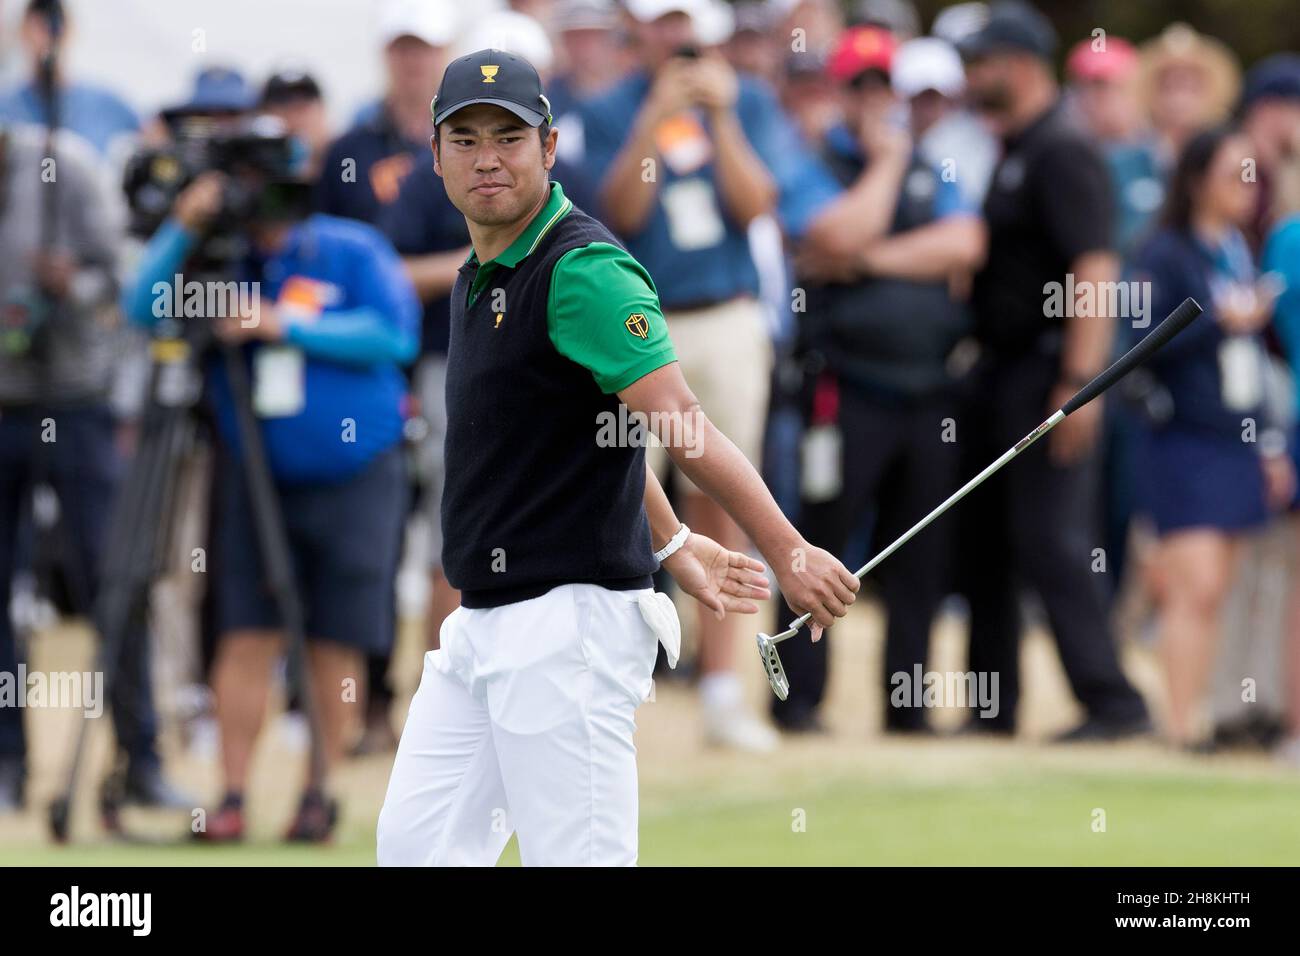 Hideki Matsuyama of Japan misses a putt during round 2 of The Presidents Cup Credit: Speed Media/Alamy Live News Stock Photo